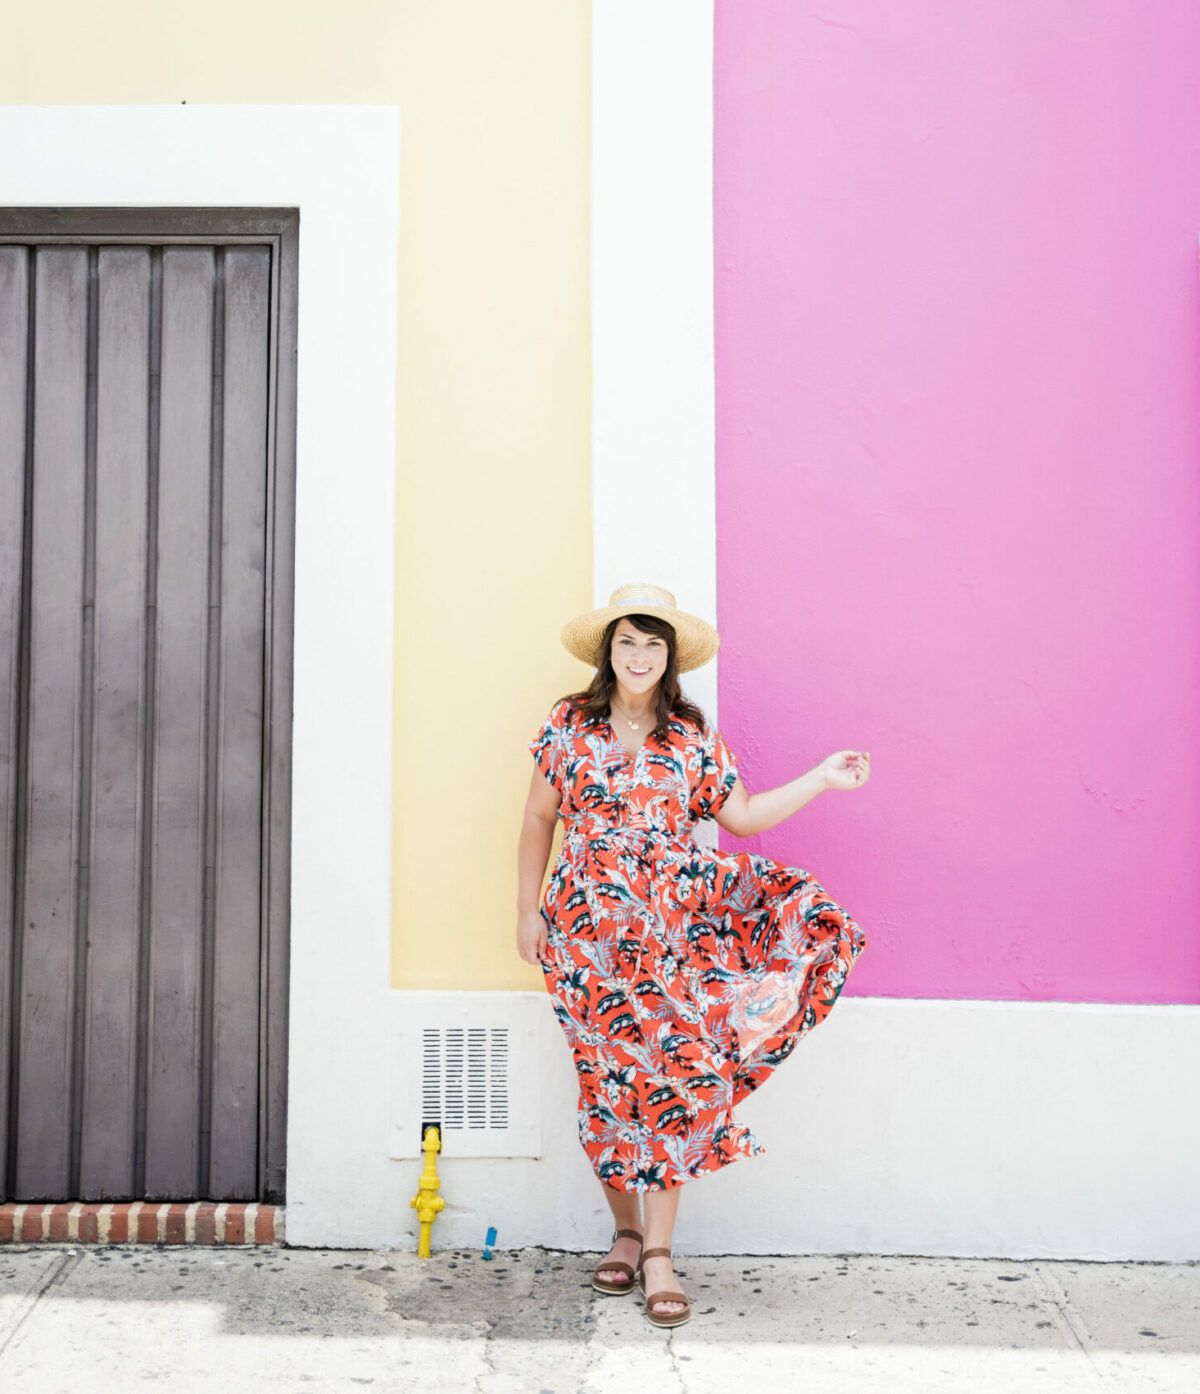 yellow and pink wall, female toss dress skirt in air